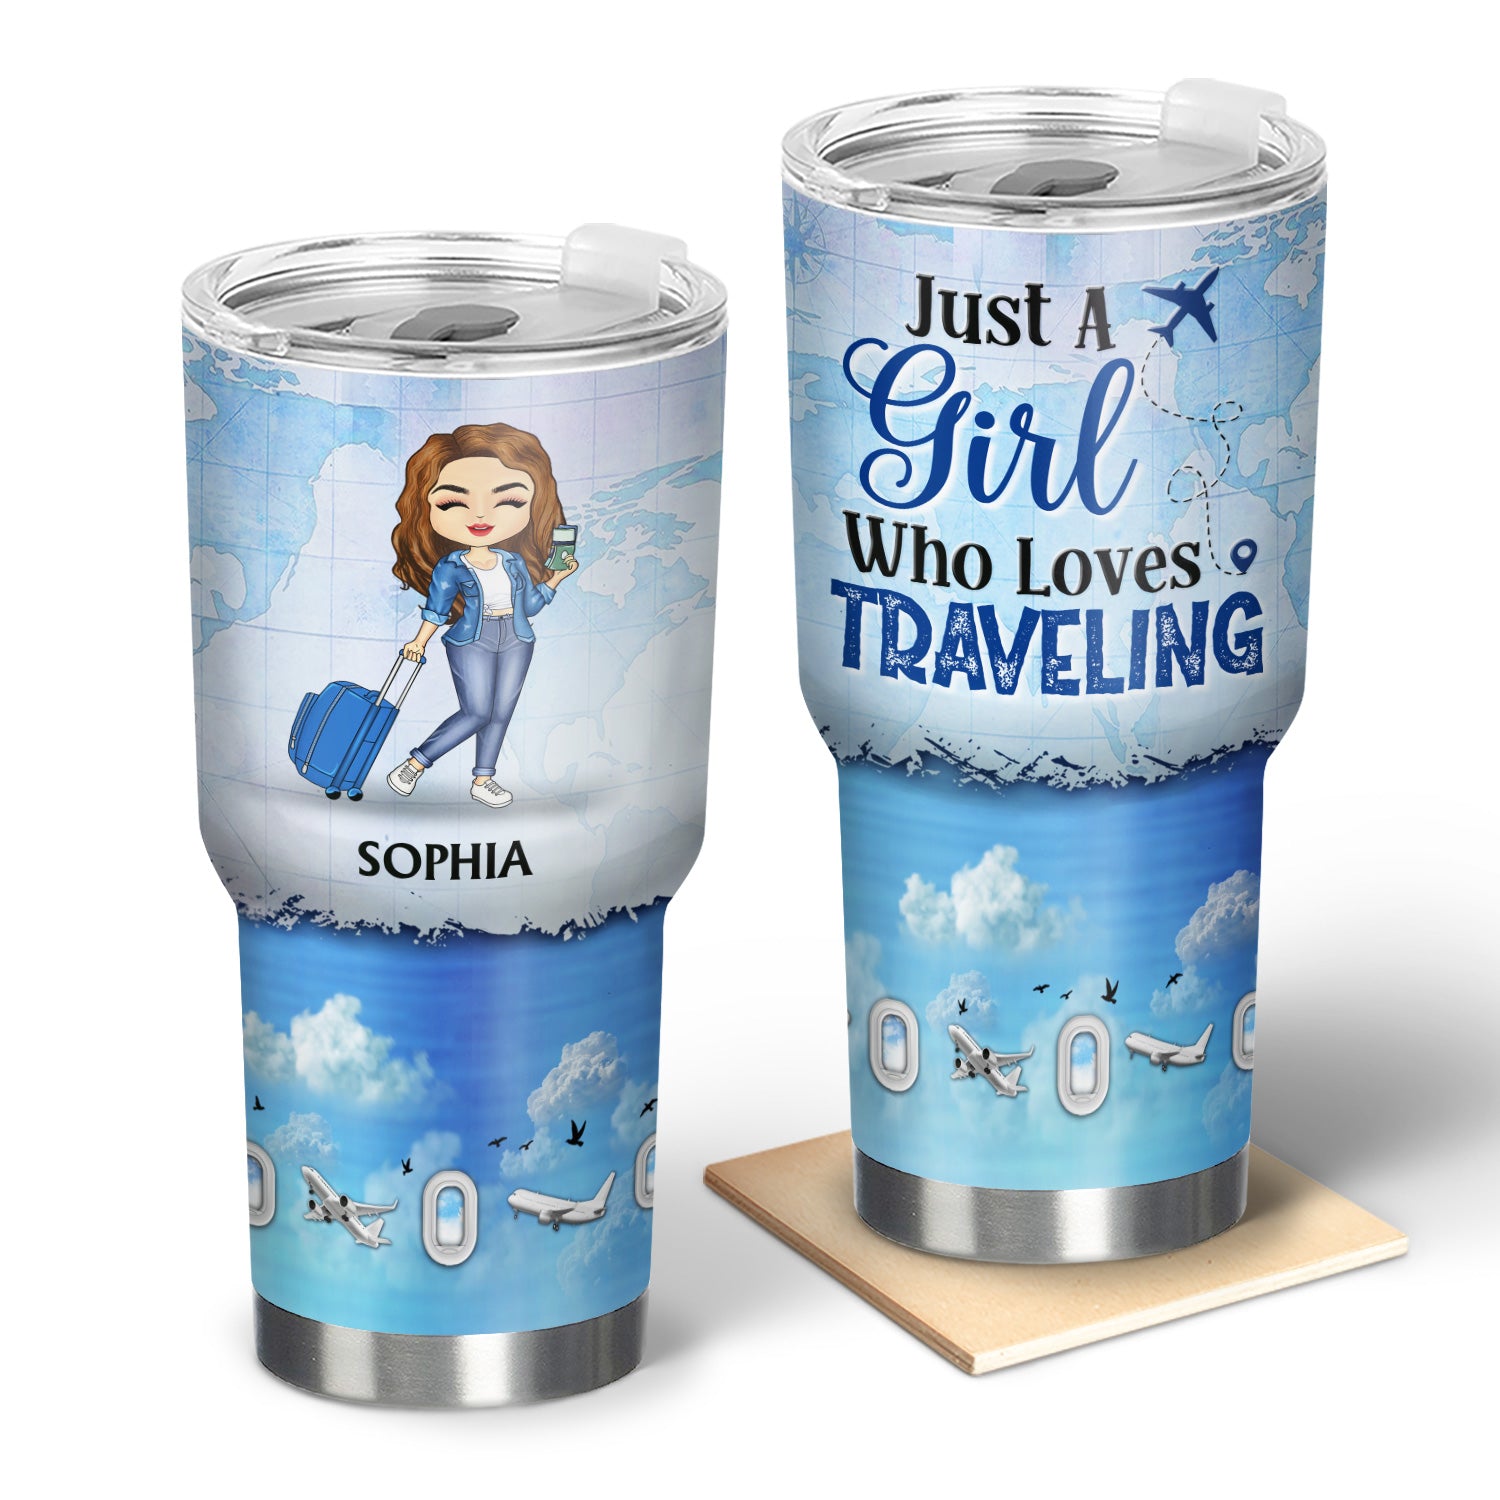 Just A Girl Boy Who Loves Traveling Cruising - Birthday Gift For Him, Her, Trippin', Vacation Lovers - Personalized Custom 30 Oz Tumbler